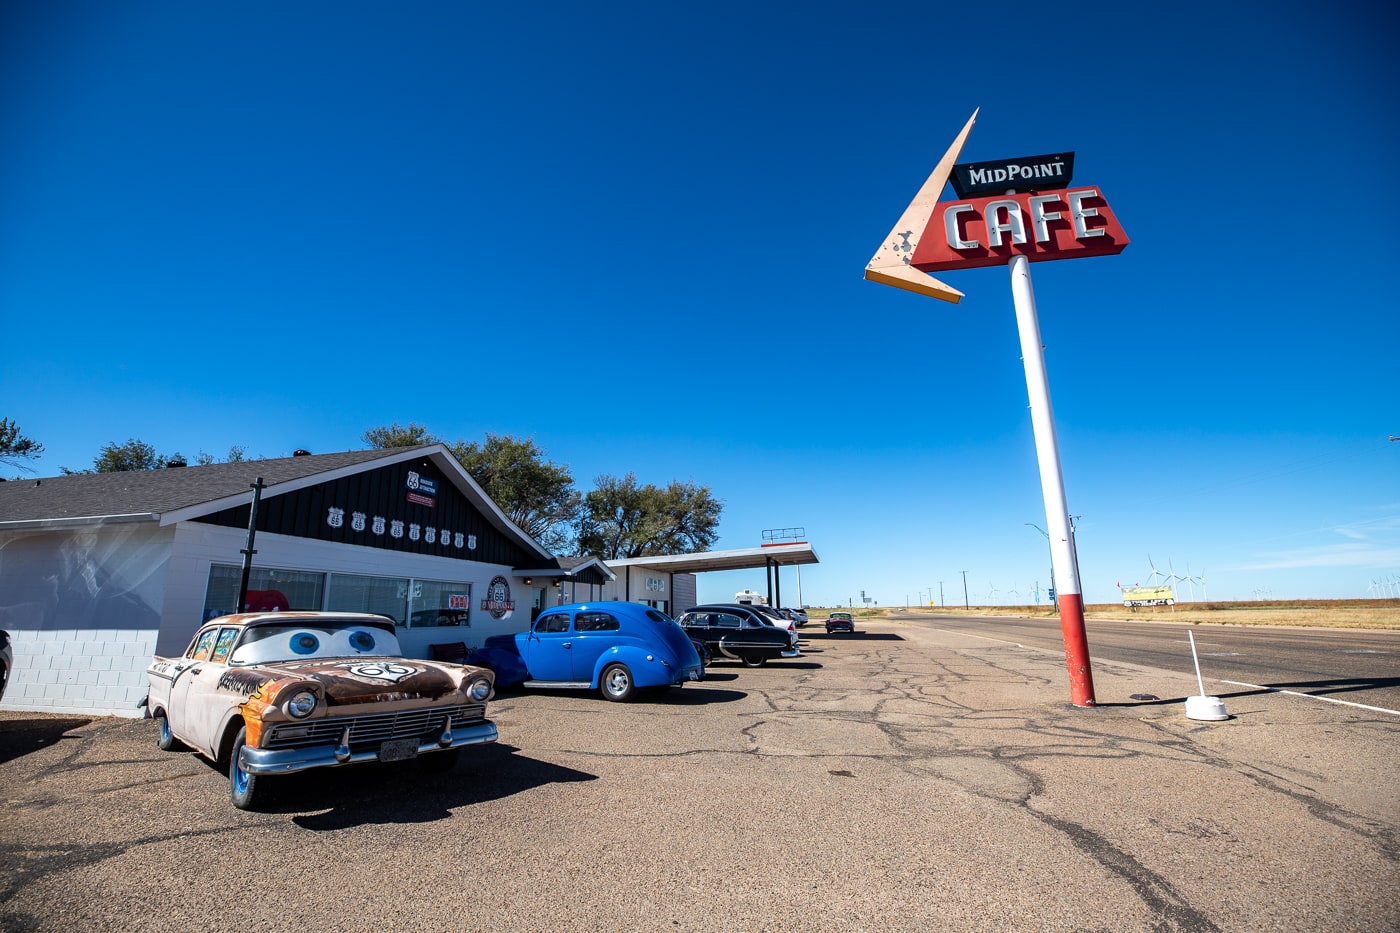 Route 66 Midpoint Cafe in Adrian, Texas